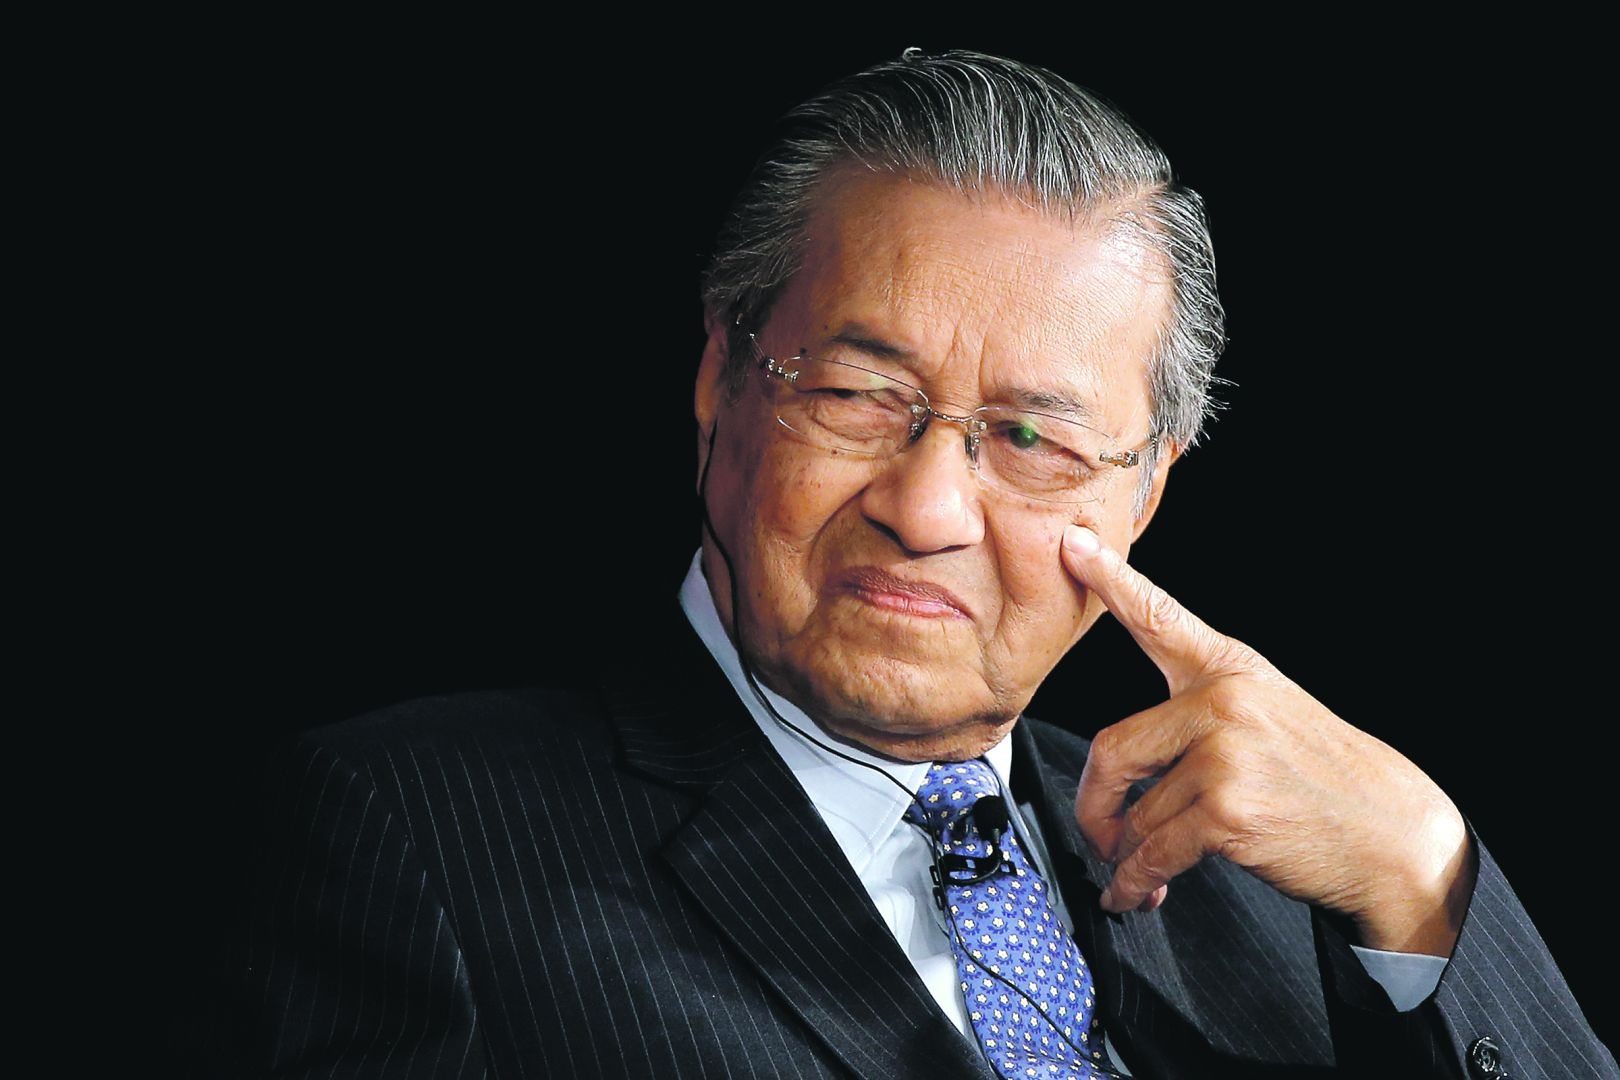 Wallpaper Tribute to Tun Dr Mahathir Mohamad | Azhan.co